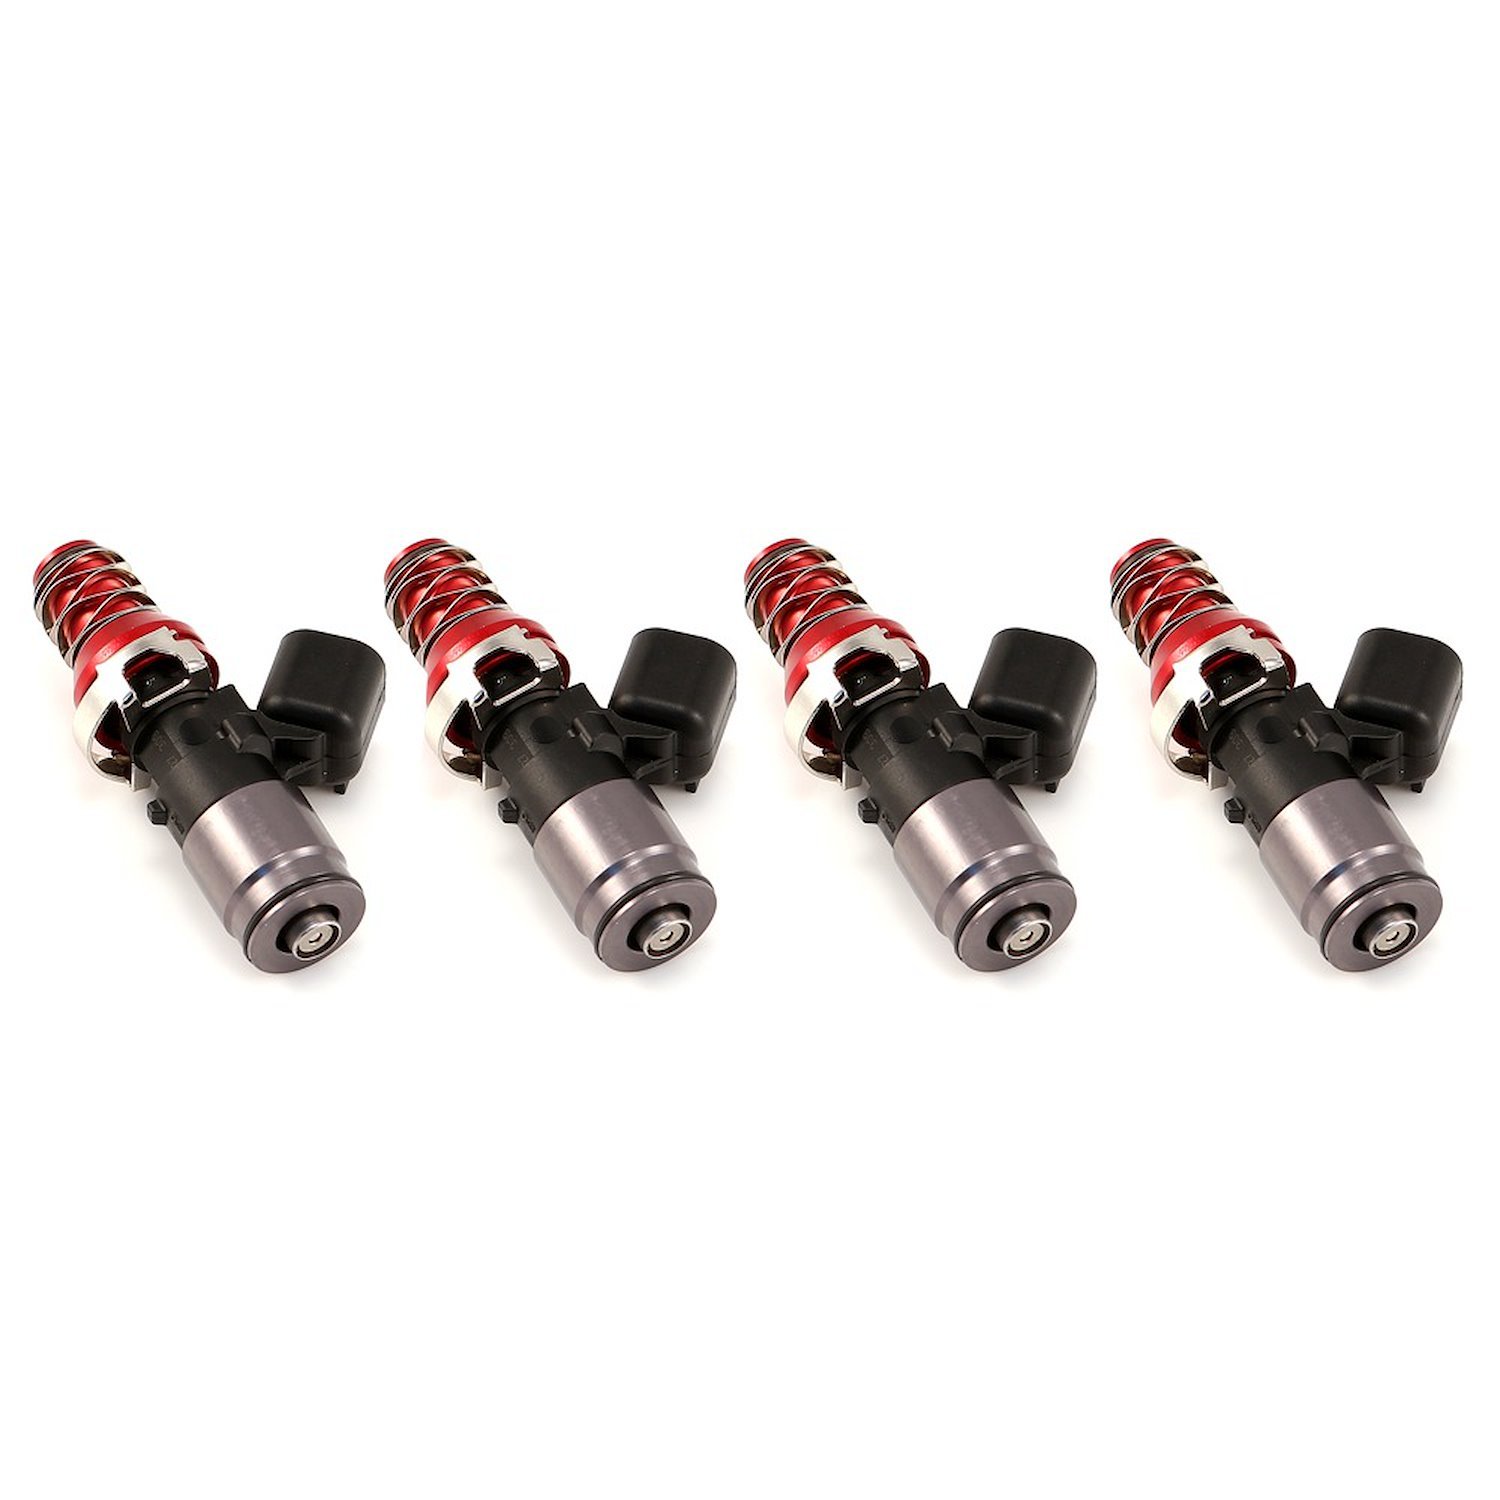 2600.60.11.14.4 2600cc Fuel Injector Set, 60 mm Length, 11 mm Top, 14 mm Lower O-Ring